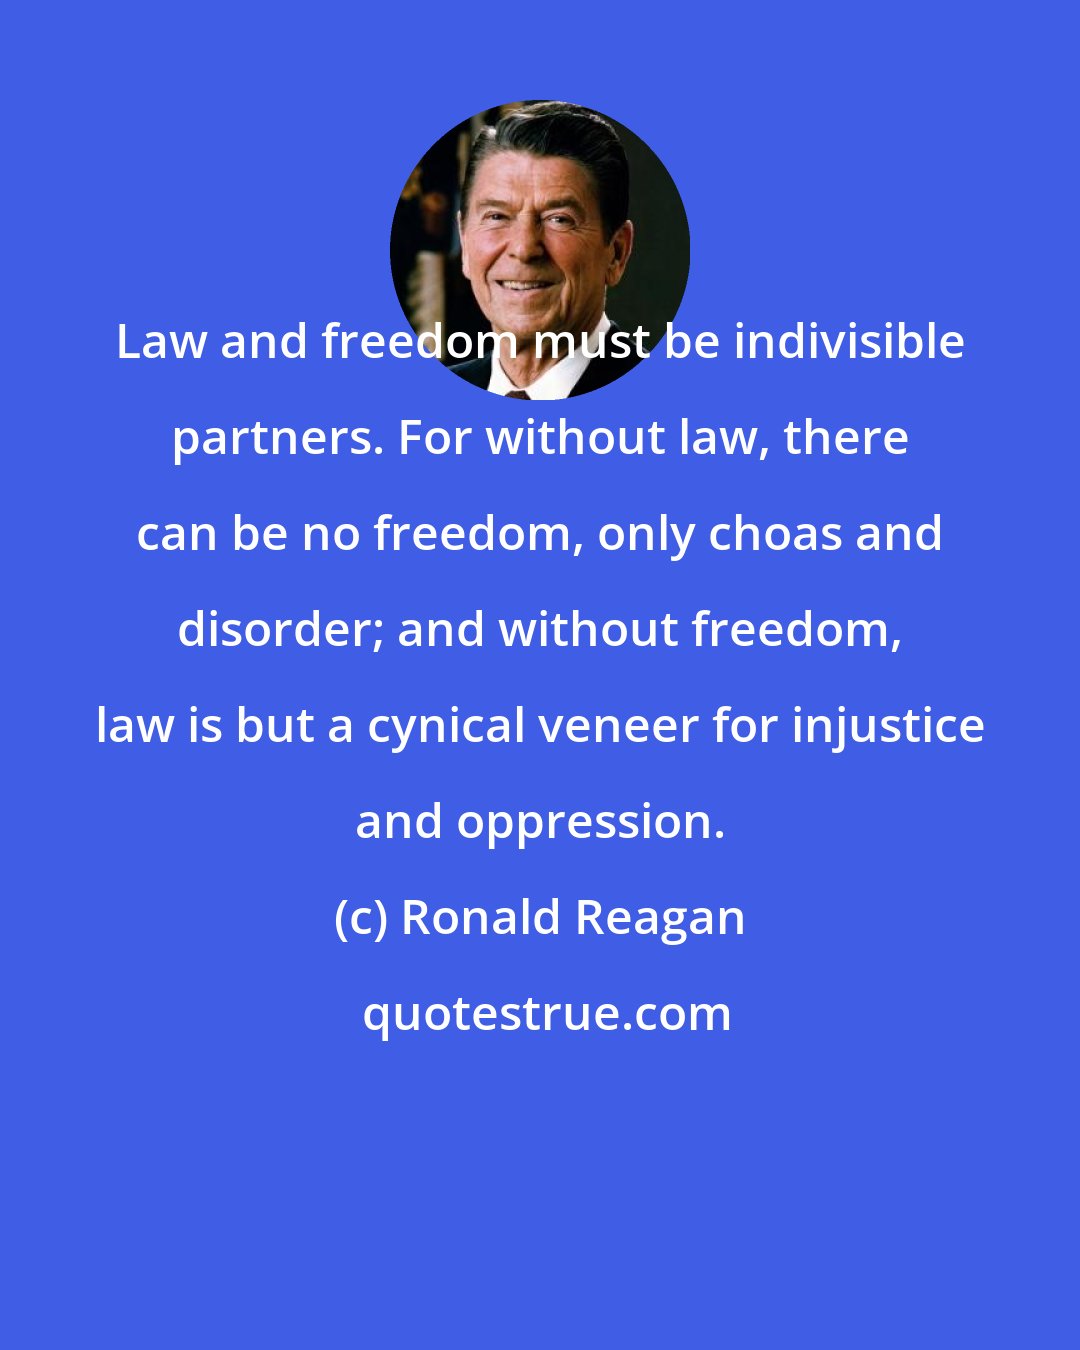 Ronald Reagan: Law and freedom must be indivisible partners. For without law, there can be no freedom, only choas and disorder; and without freedom, law is but a cynical veneer for injustice and oppression.